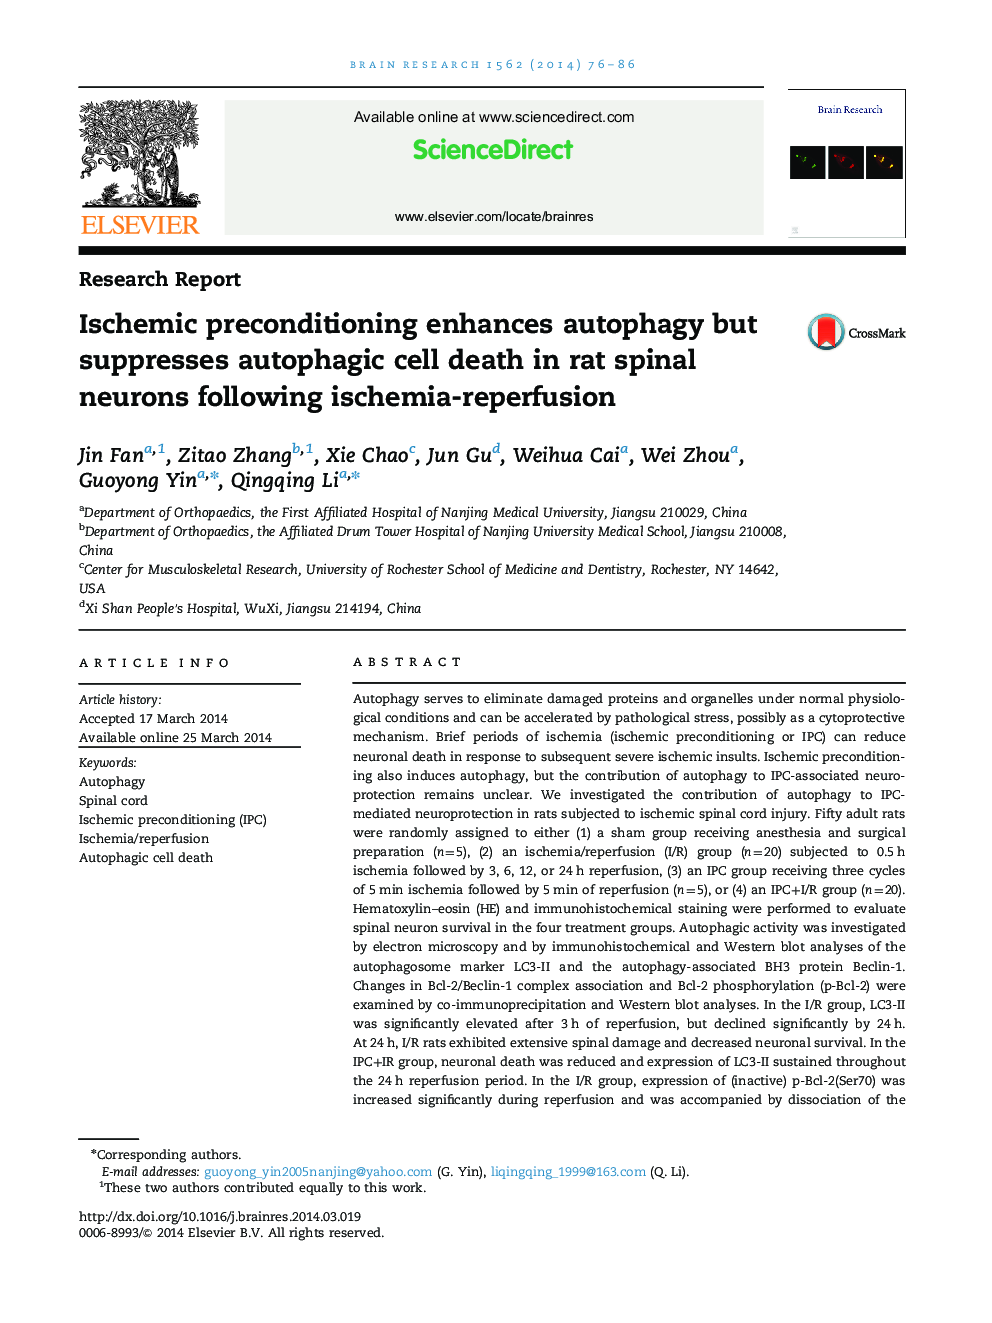 Ischemic preconditioning enhances autophagy but suppresses autophagic cell death in rat spinal neurons following ischemia-reperfusion